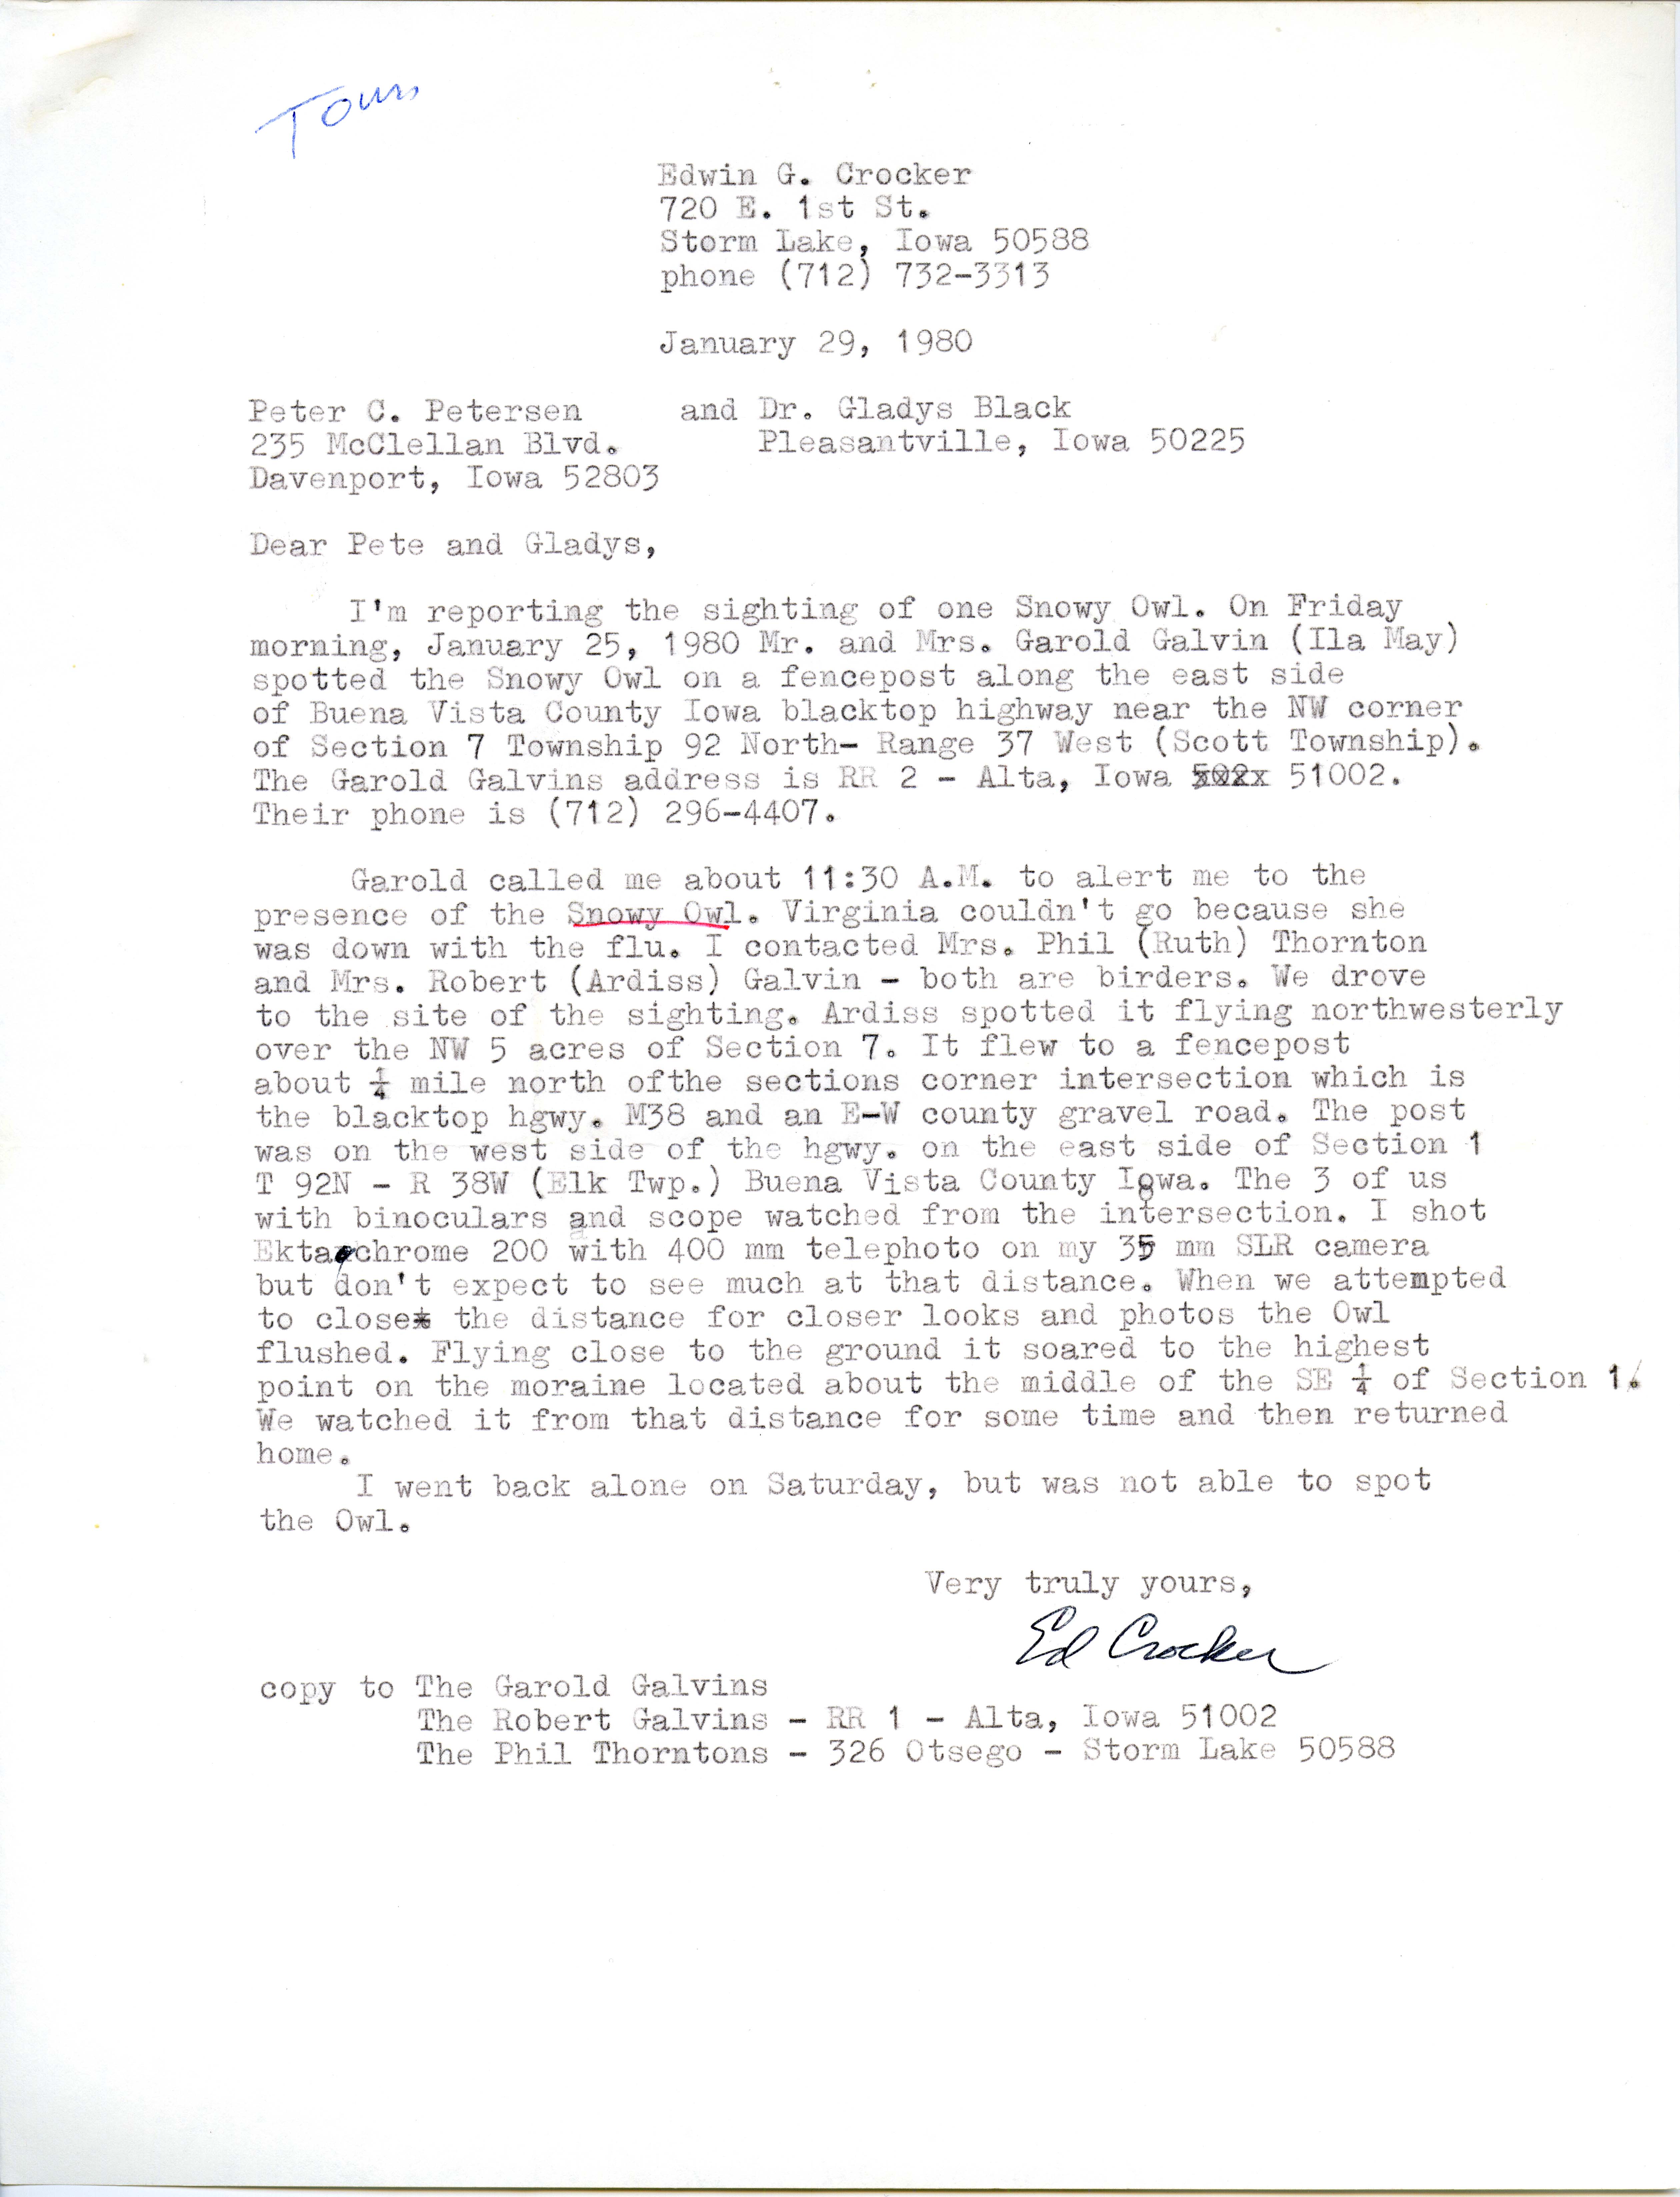 Edwin G. Crocker letter to Peter C. Petersen and Gladys Black regarding sighting of a Snowy Owl, January 29, 1980